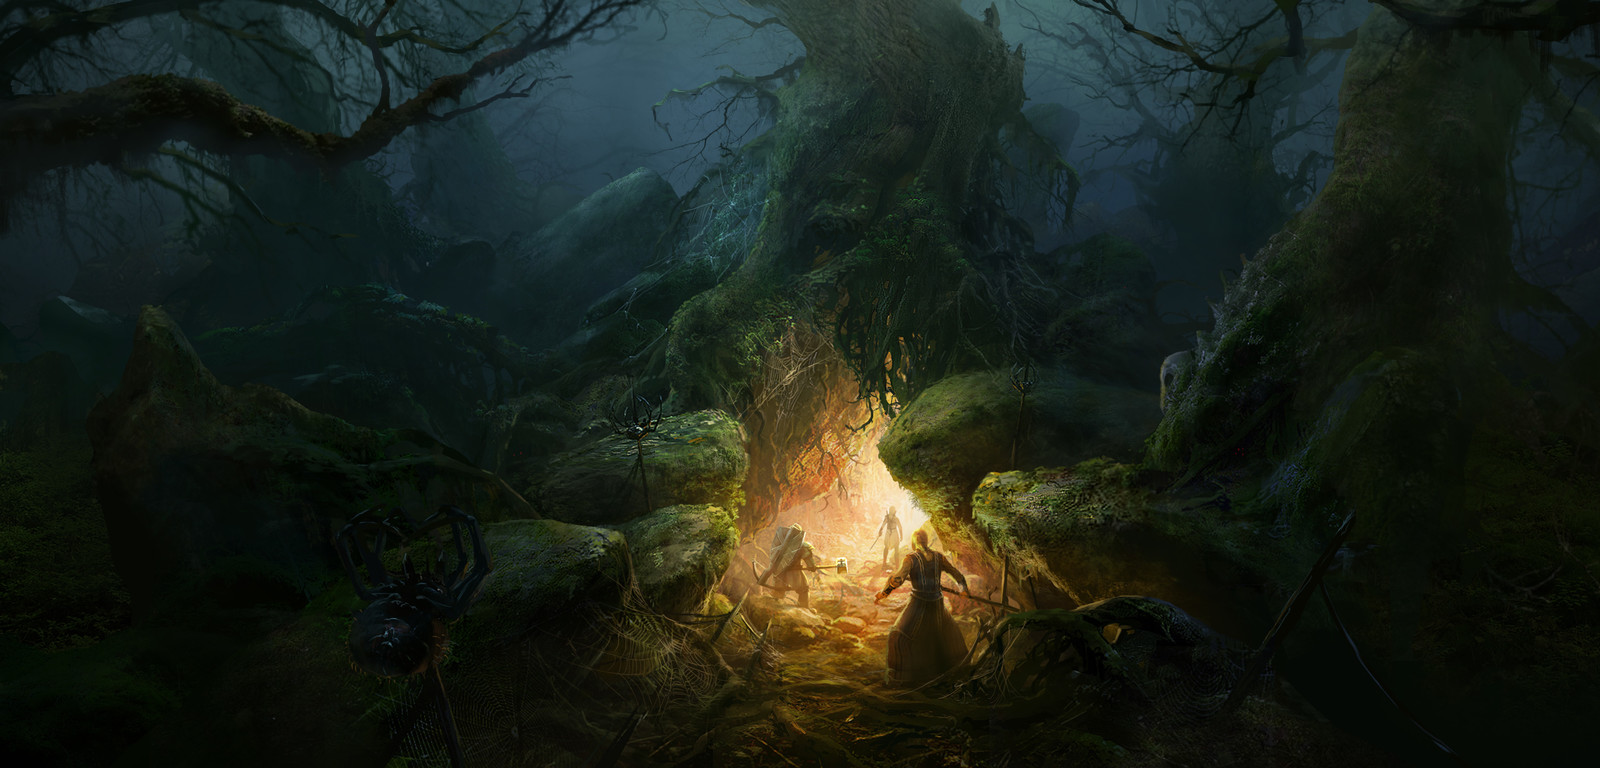 The Lord of The Rings: Mirkwood